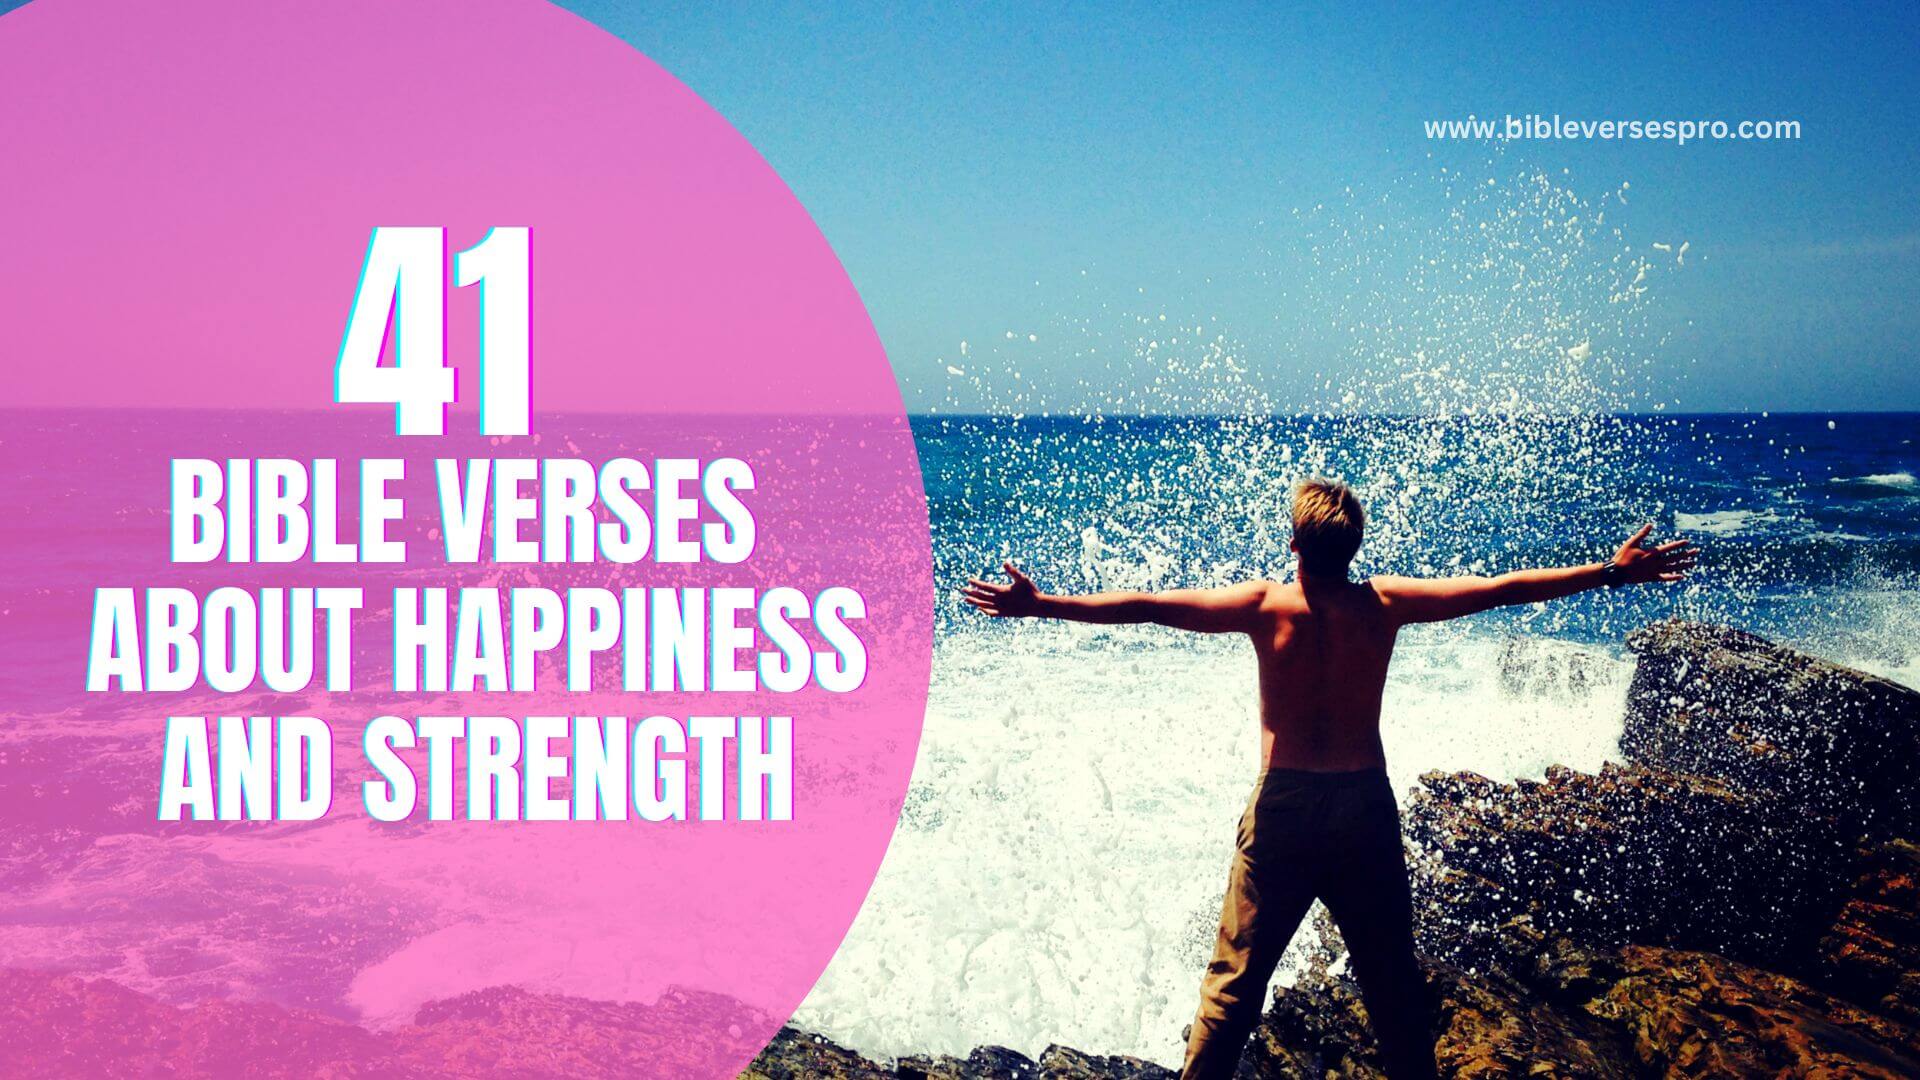 41 Bible Verses About Finding Happiness & Joy in Life